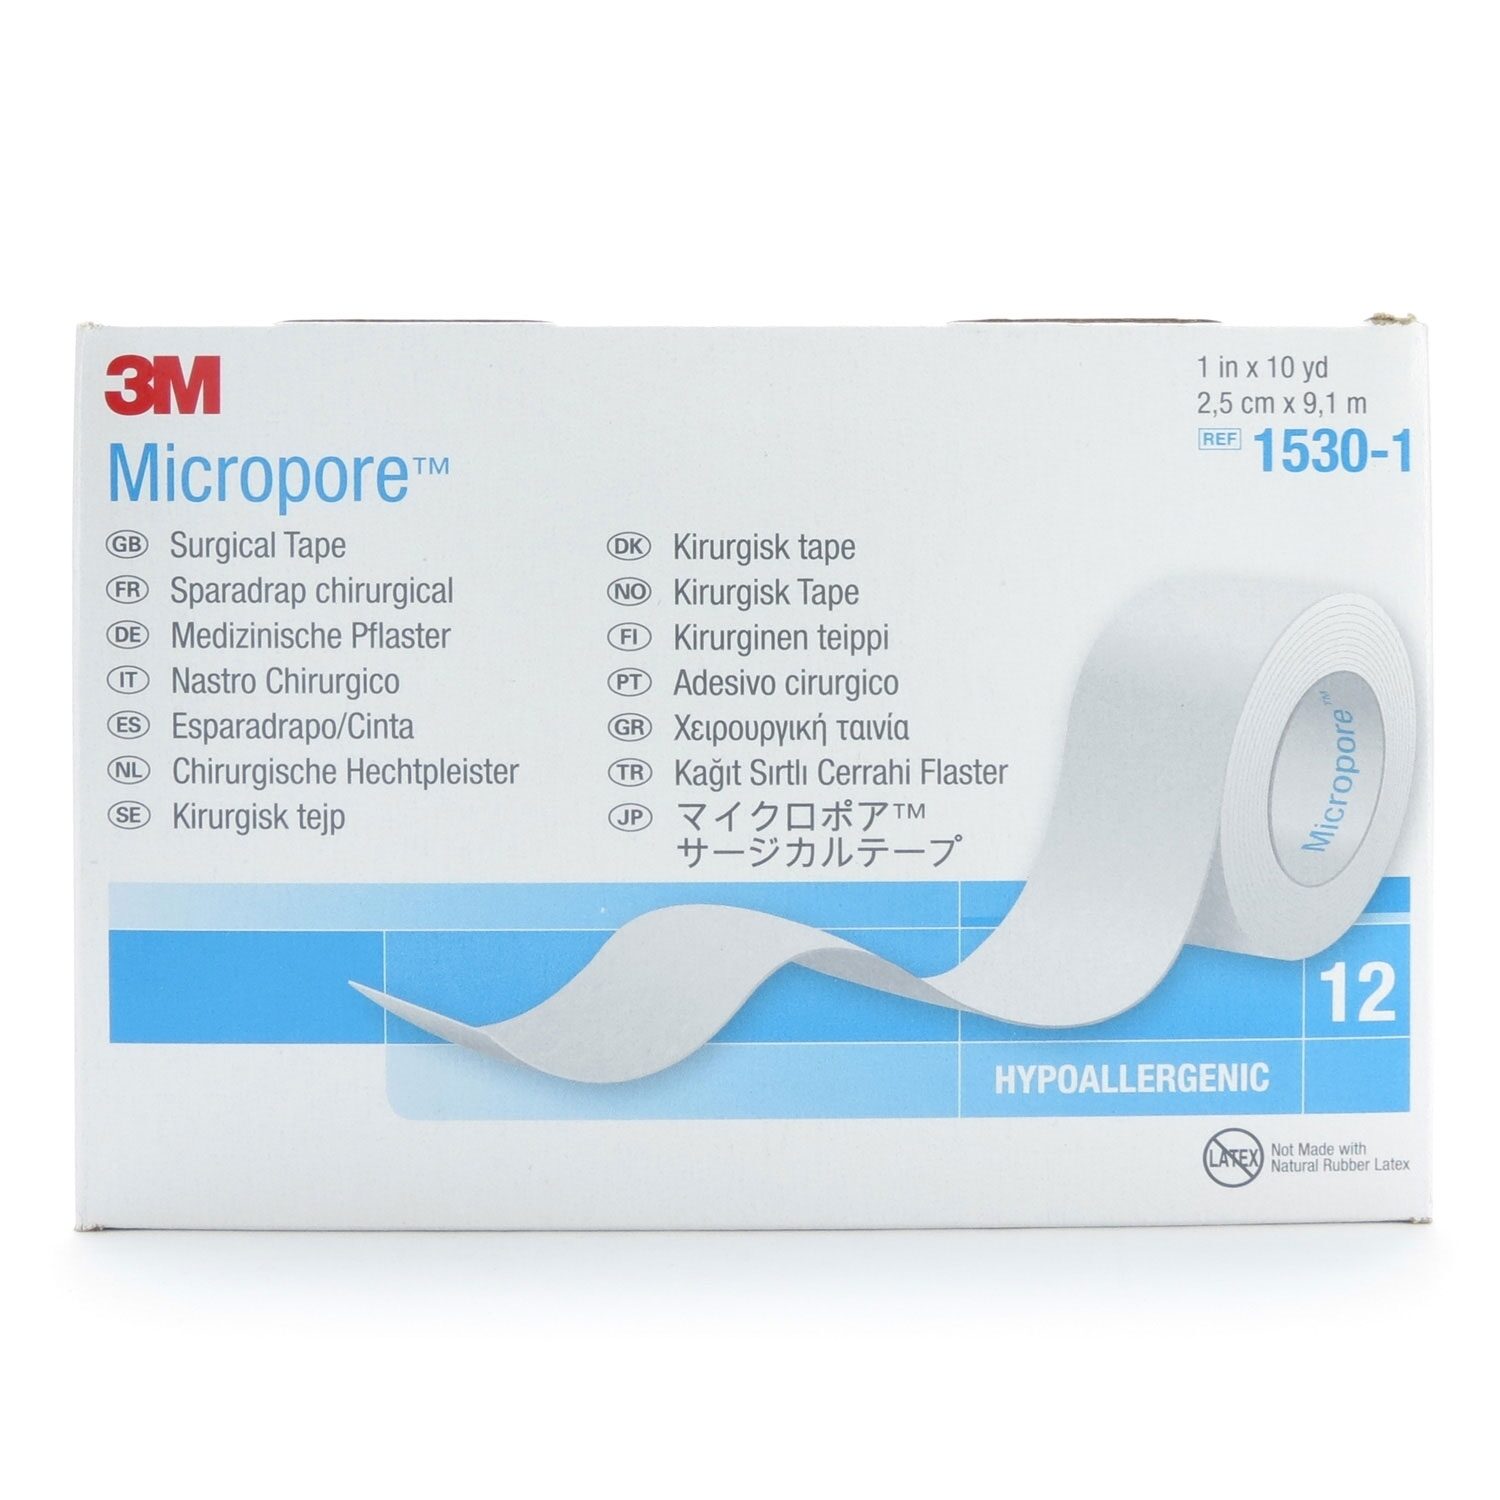 3M Micropore Surgical Tape, 1 X 10 Yards, 1530-1, 3 ROLLS